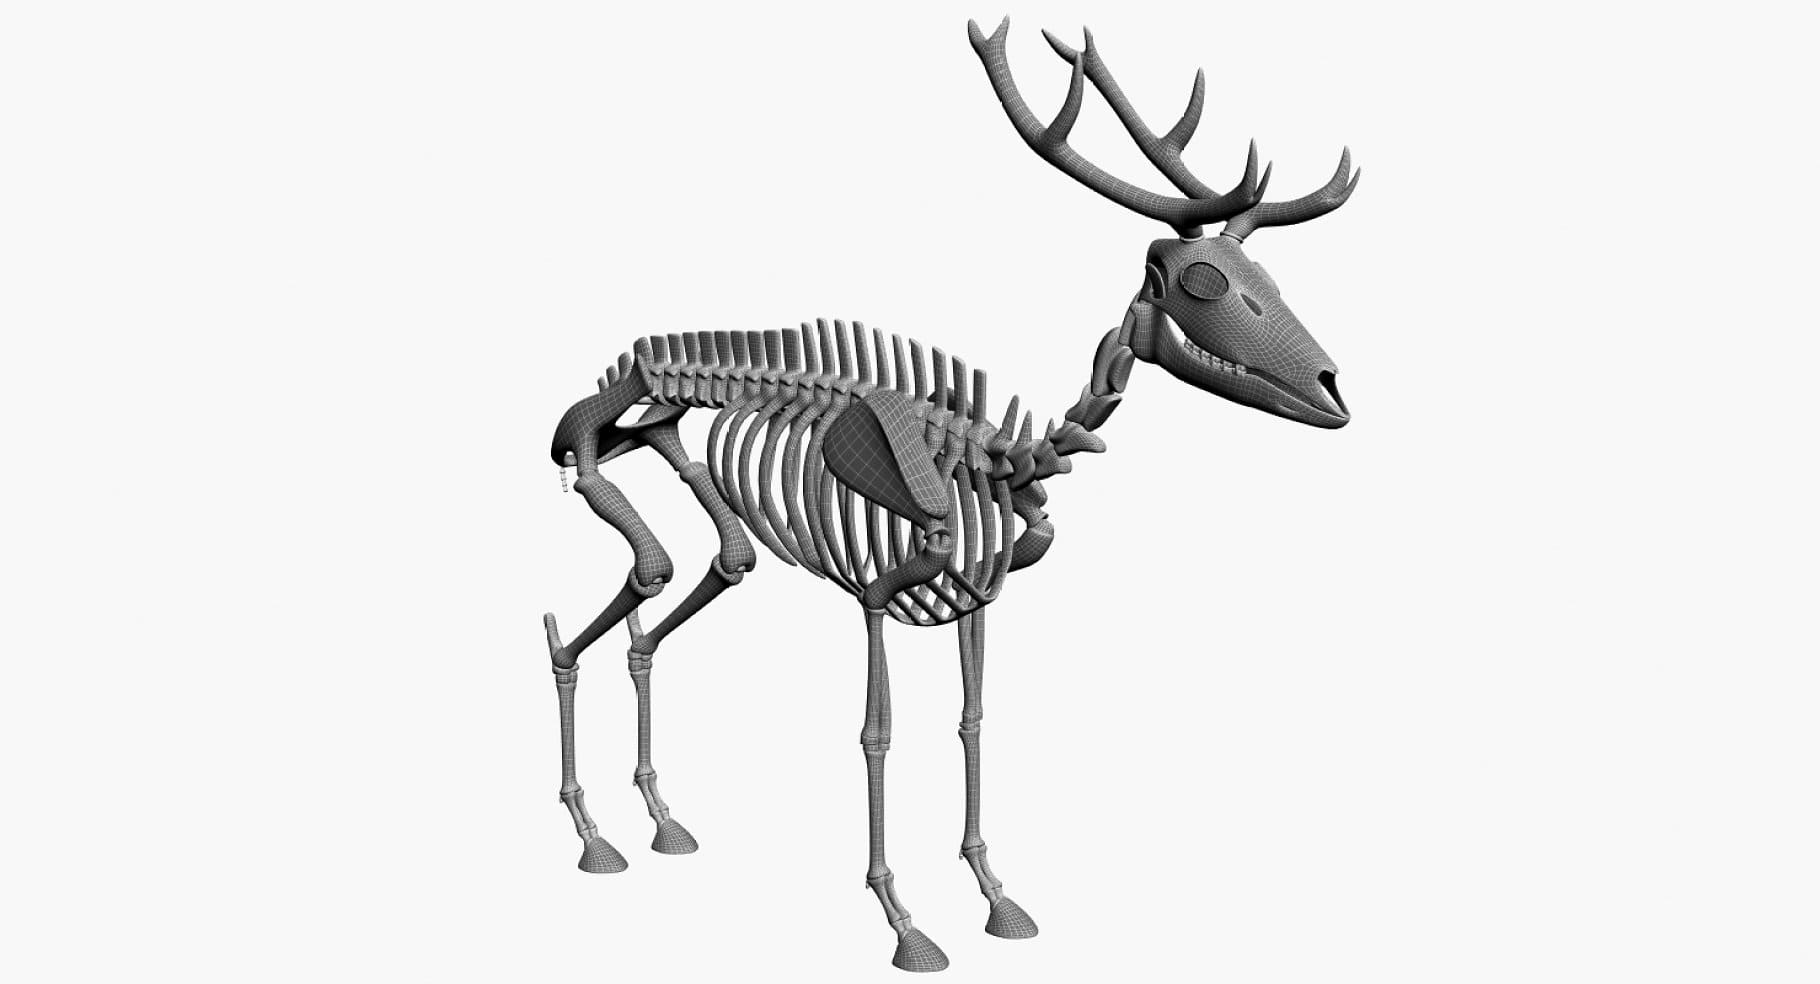 Image of the skeleton of a deer from the right side and its thin legs.